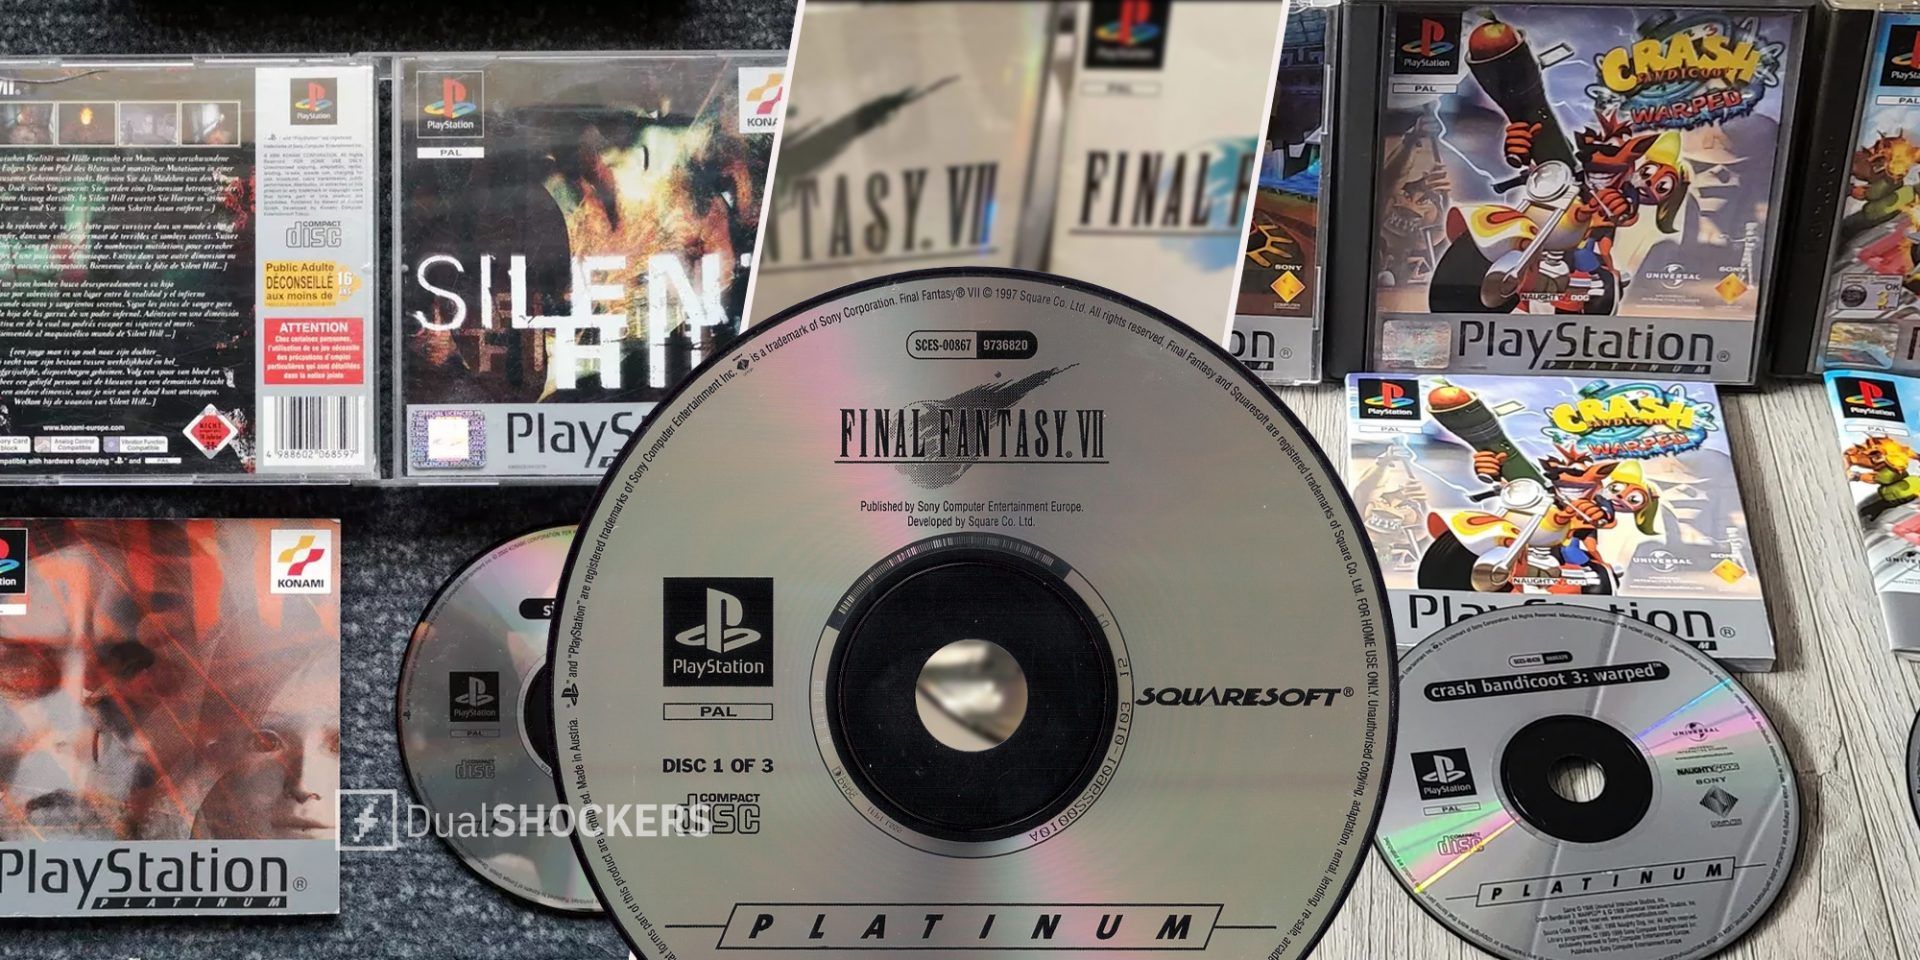 Playstation 1 Silent Hill Platinum Collection on left, Final Fantasy VII in middle, Crash Bandicoot games on right